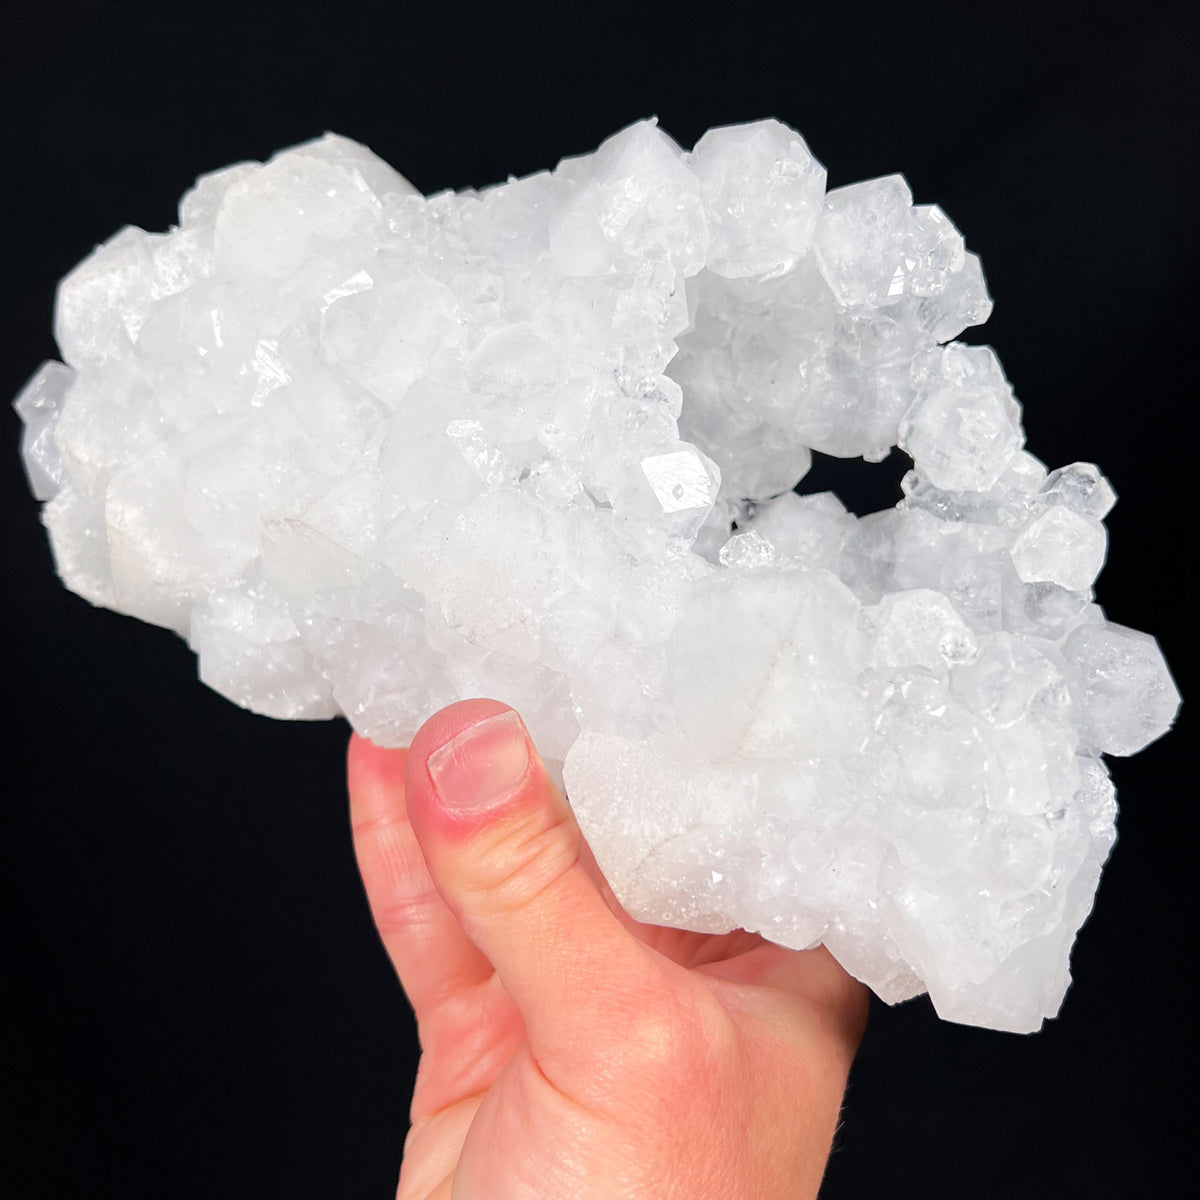 Apophyllite Crystals forming a Cast